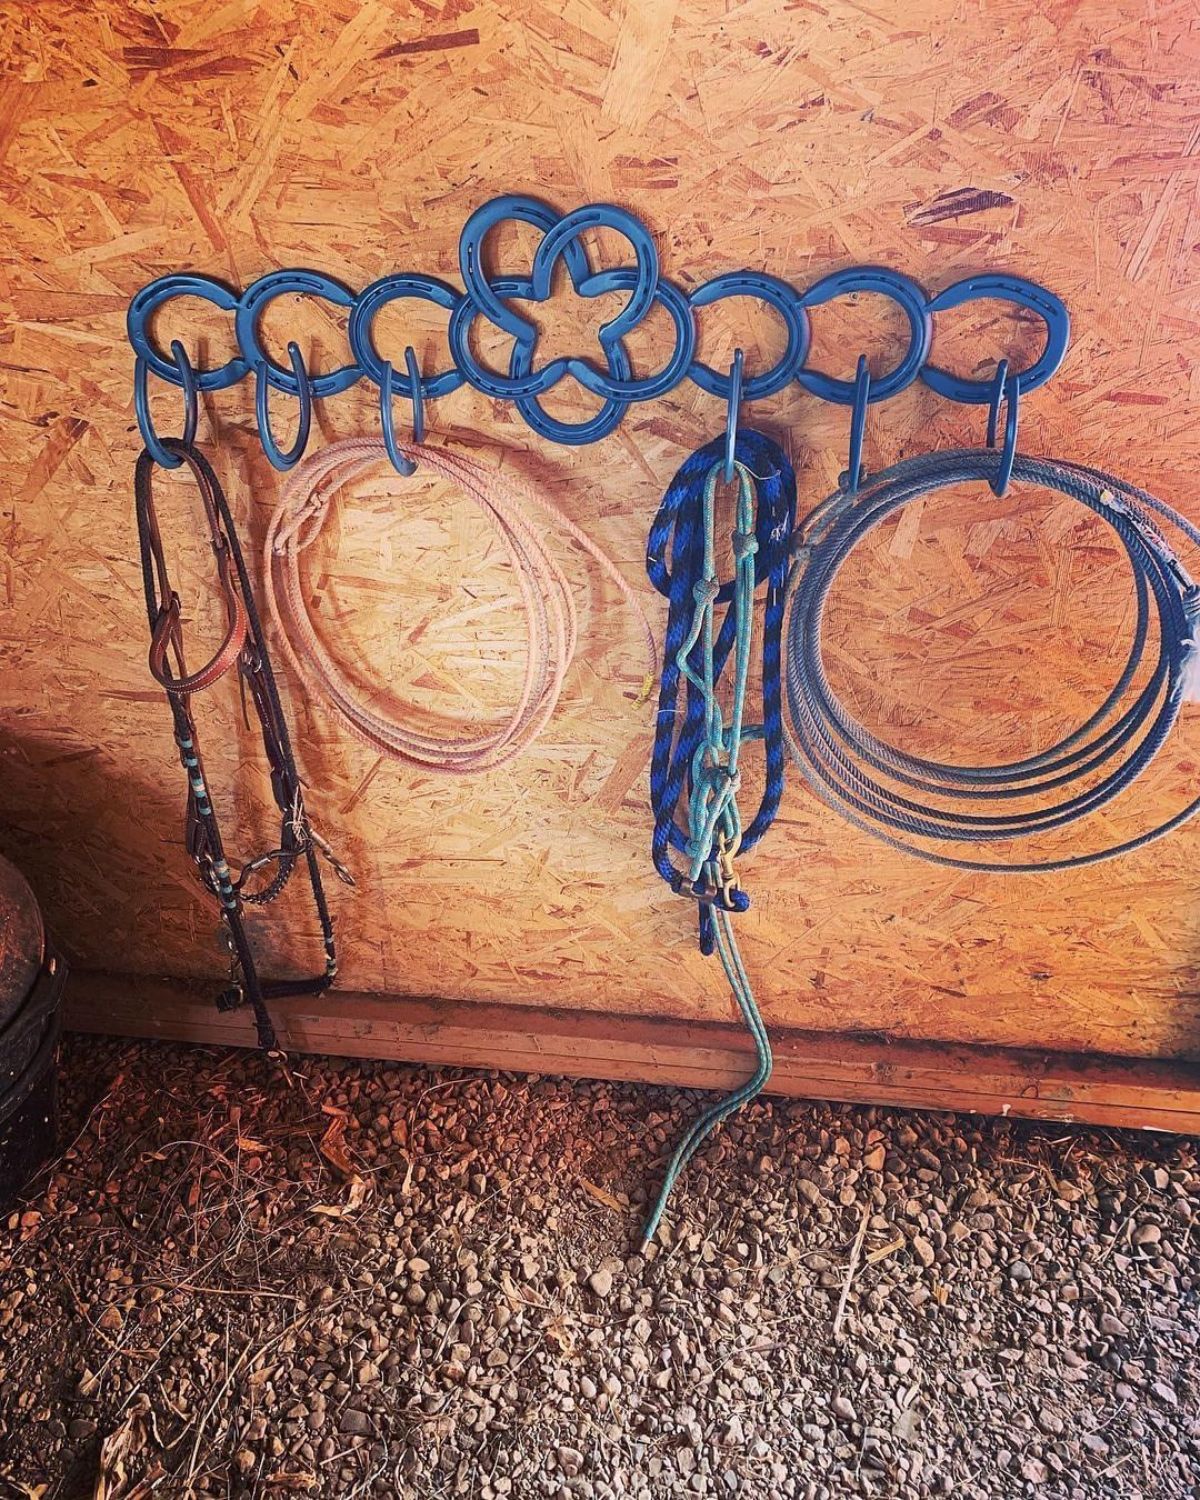 A horseshoe rack with bridles, halters, and ropes.